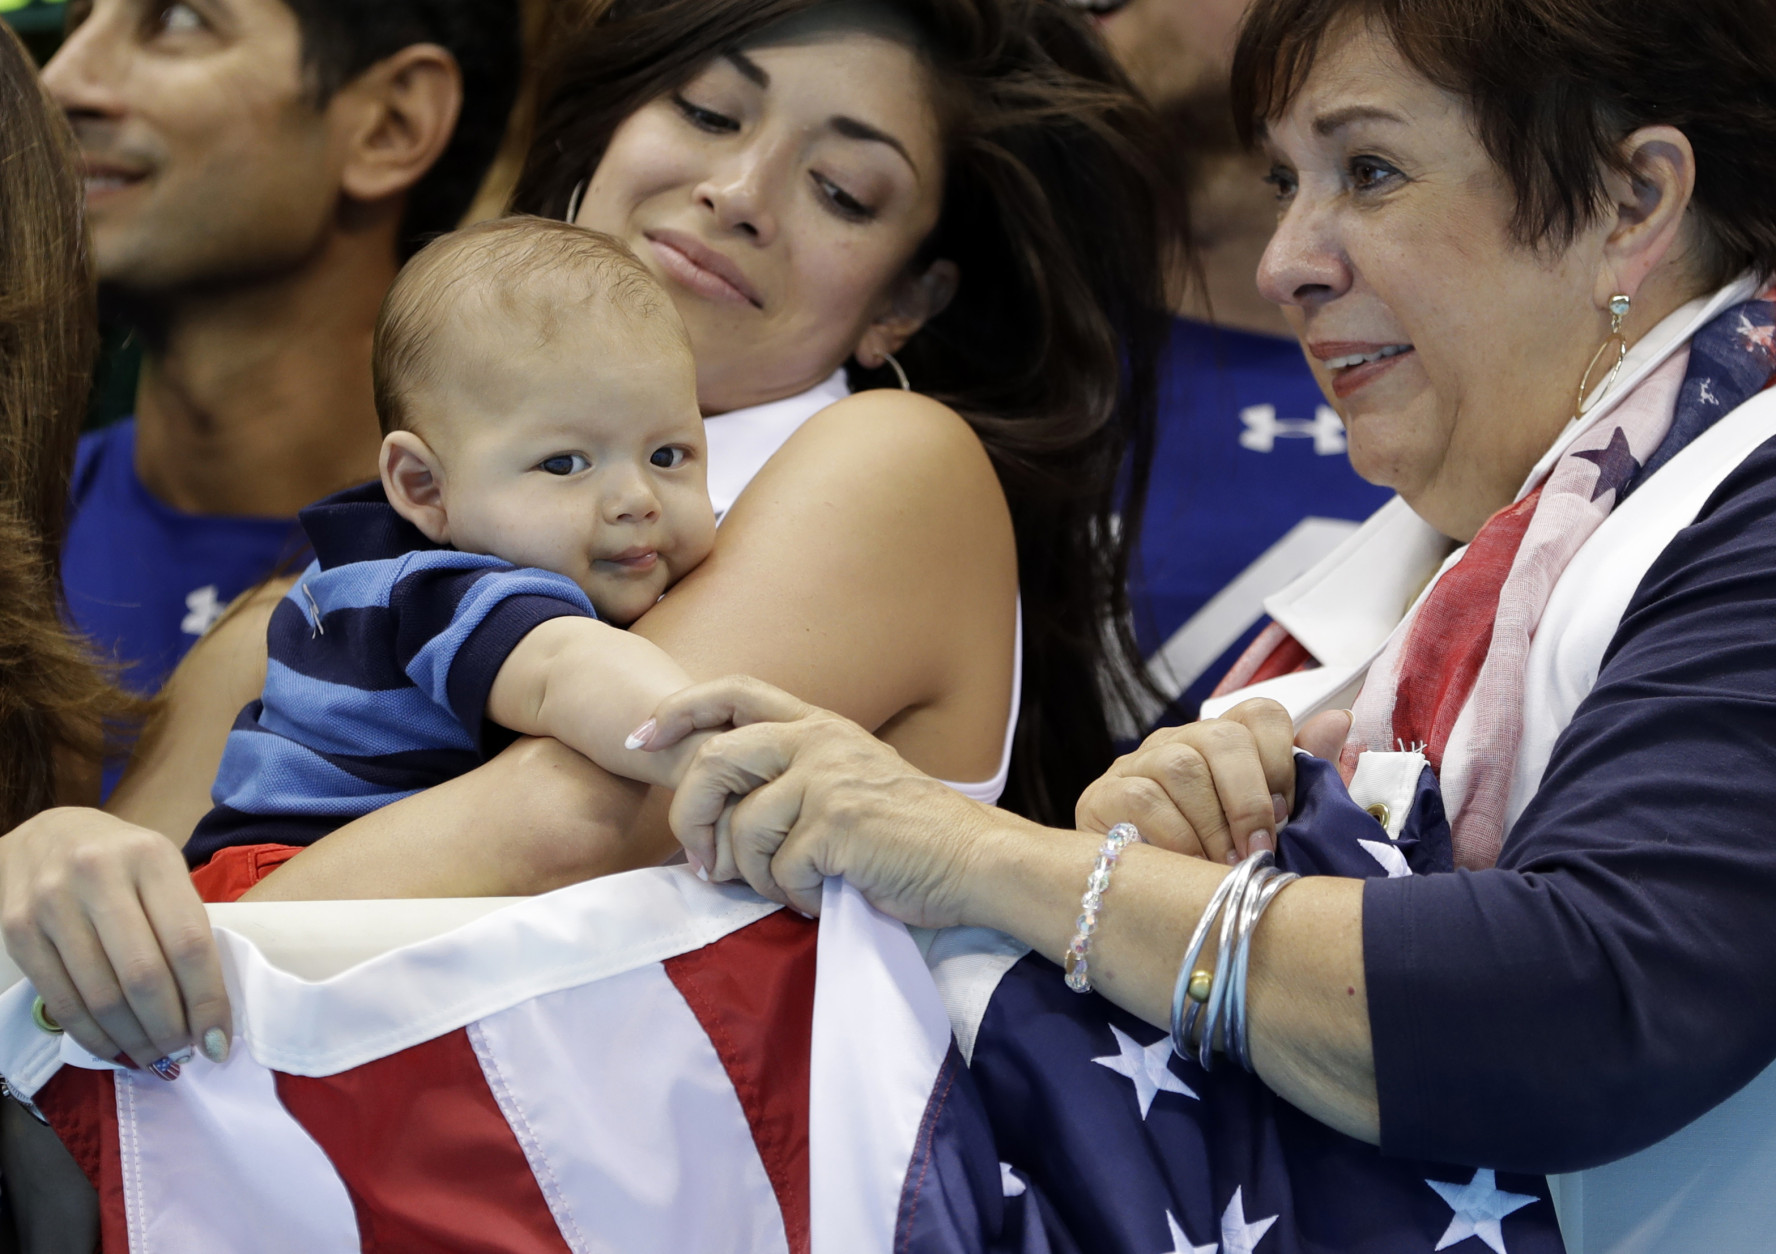 Nicole Johnson, fiance of United States' Michael Phelps, holds their baby Boomer, as she stands with Phelps' mother Debbie during the men's 4 x 100-meter medley relay final during the swimming competitions at the 2016 Summer Olympics, Saturday, Aug. 13, 2016, in Rio de Janeiro, Brazil. (AP Photo/Michael Sohn)